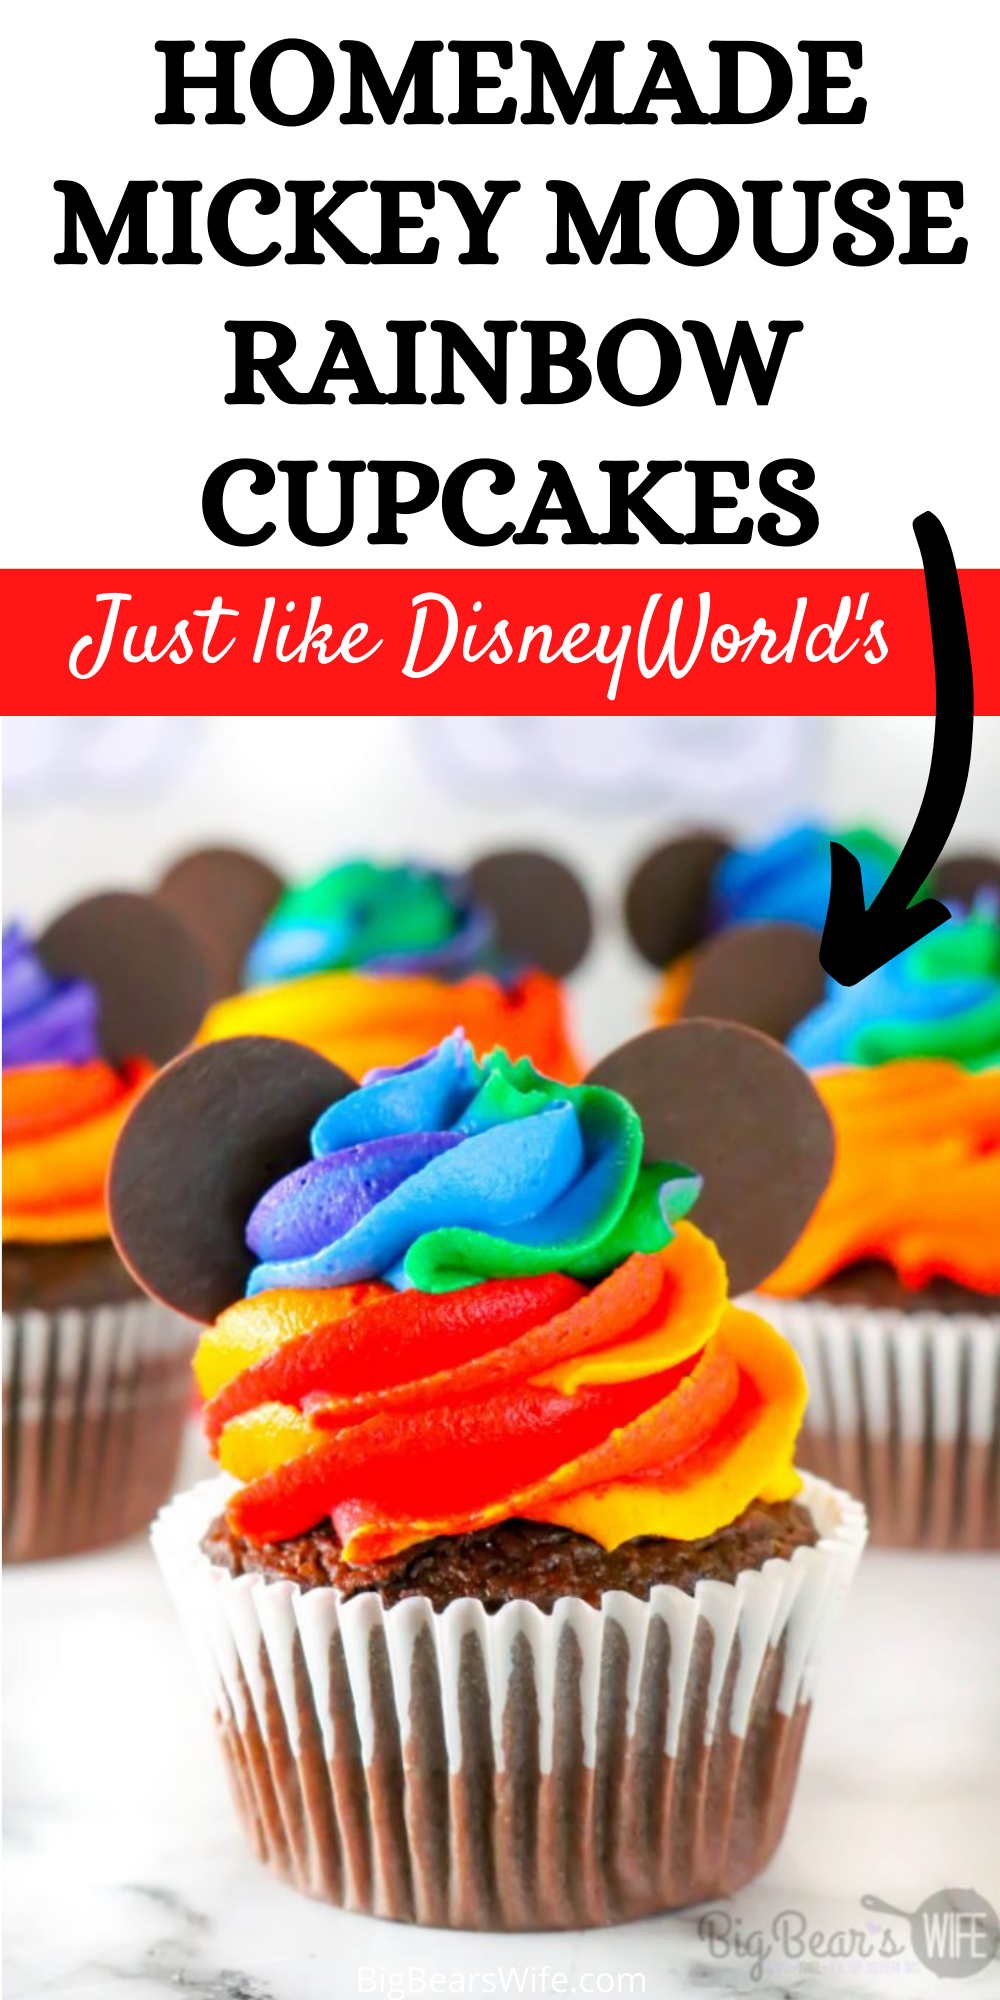 Combine the magic of Disney with the beauty of a rainbow with these adorable Homemade Mickey Mouse Rainbow Cupcakes! Inspired by the Mickey rainbow cupcakes sold at Walt Disney World, I'll show you how to make them at home!  via @bigbearswife